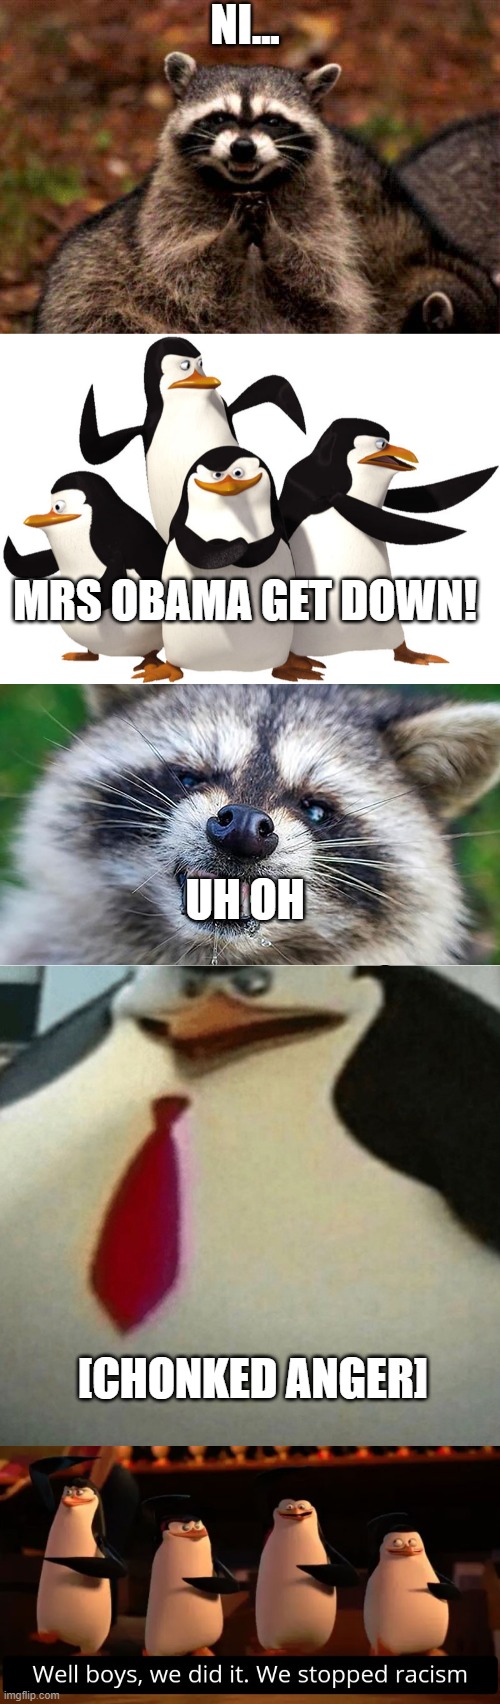 NI... MRS OBAMA GET DOWN! UH OH; [CHONKED ANGER] | image tagged in memes,evil plotting raccoon | made w/ Imgflip meme maker